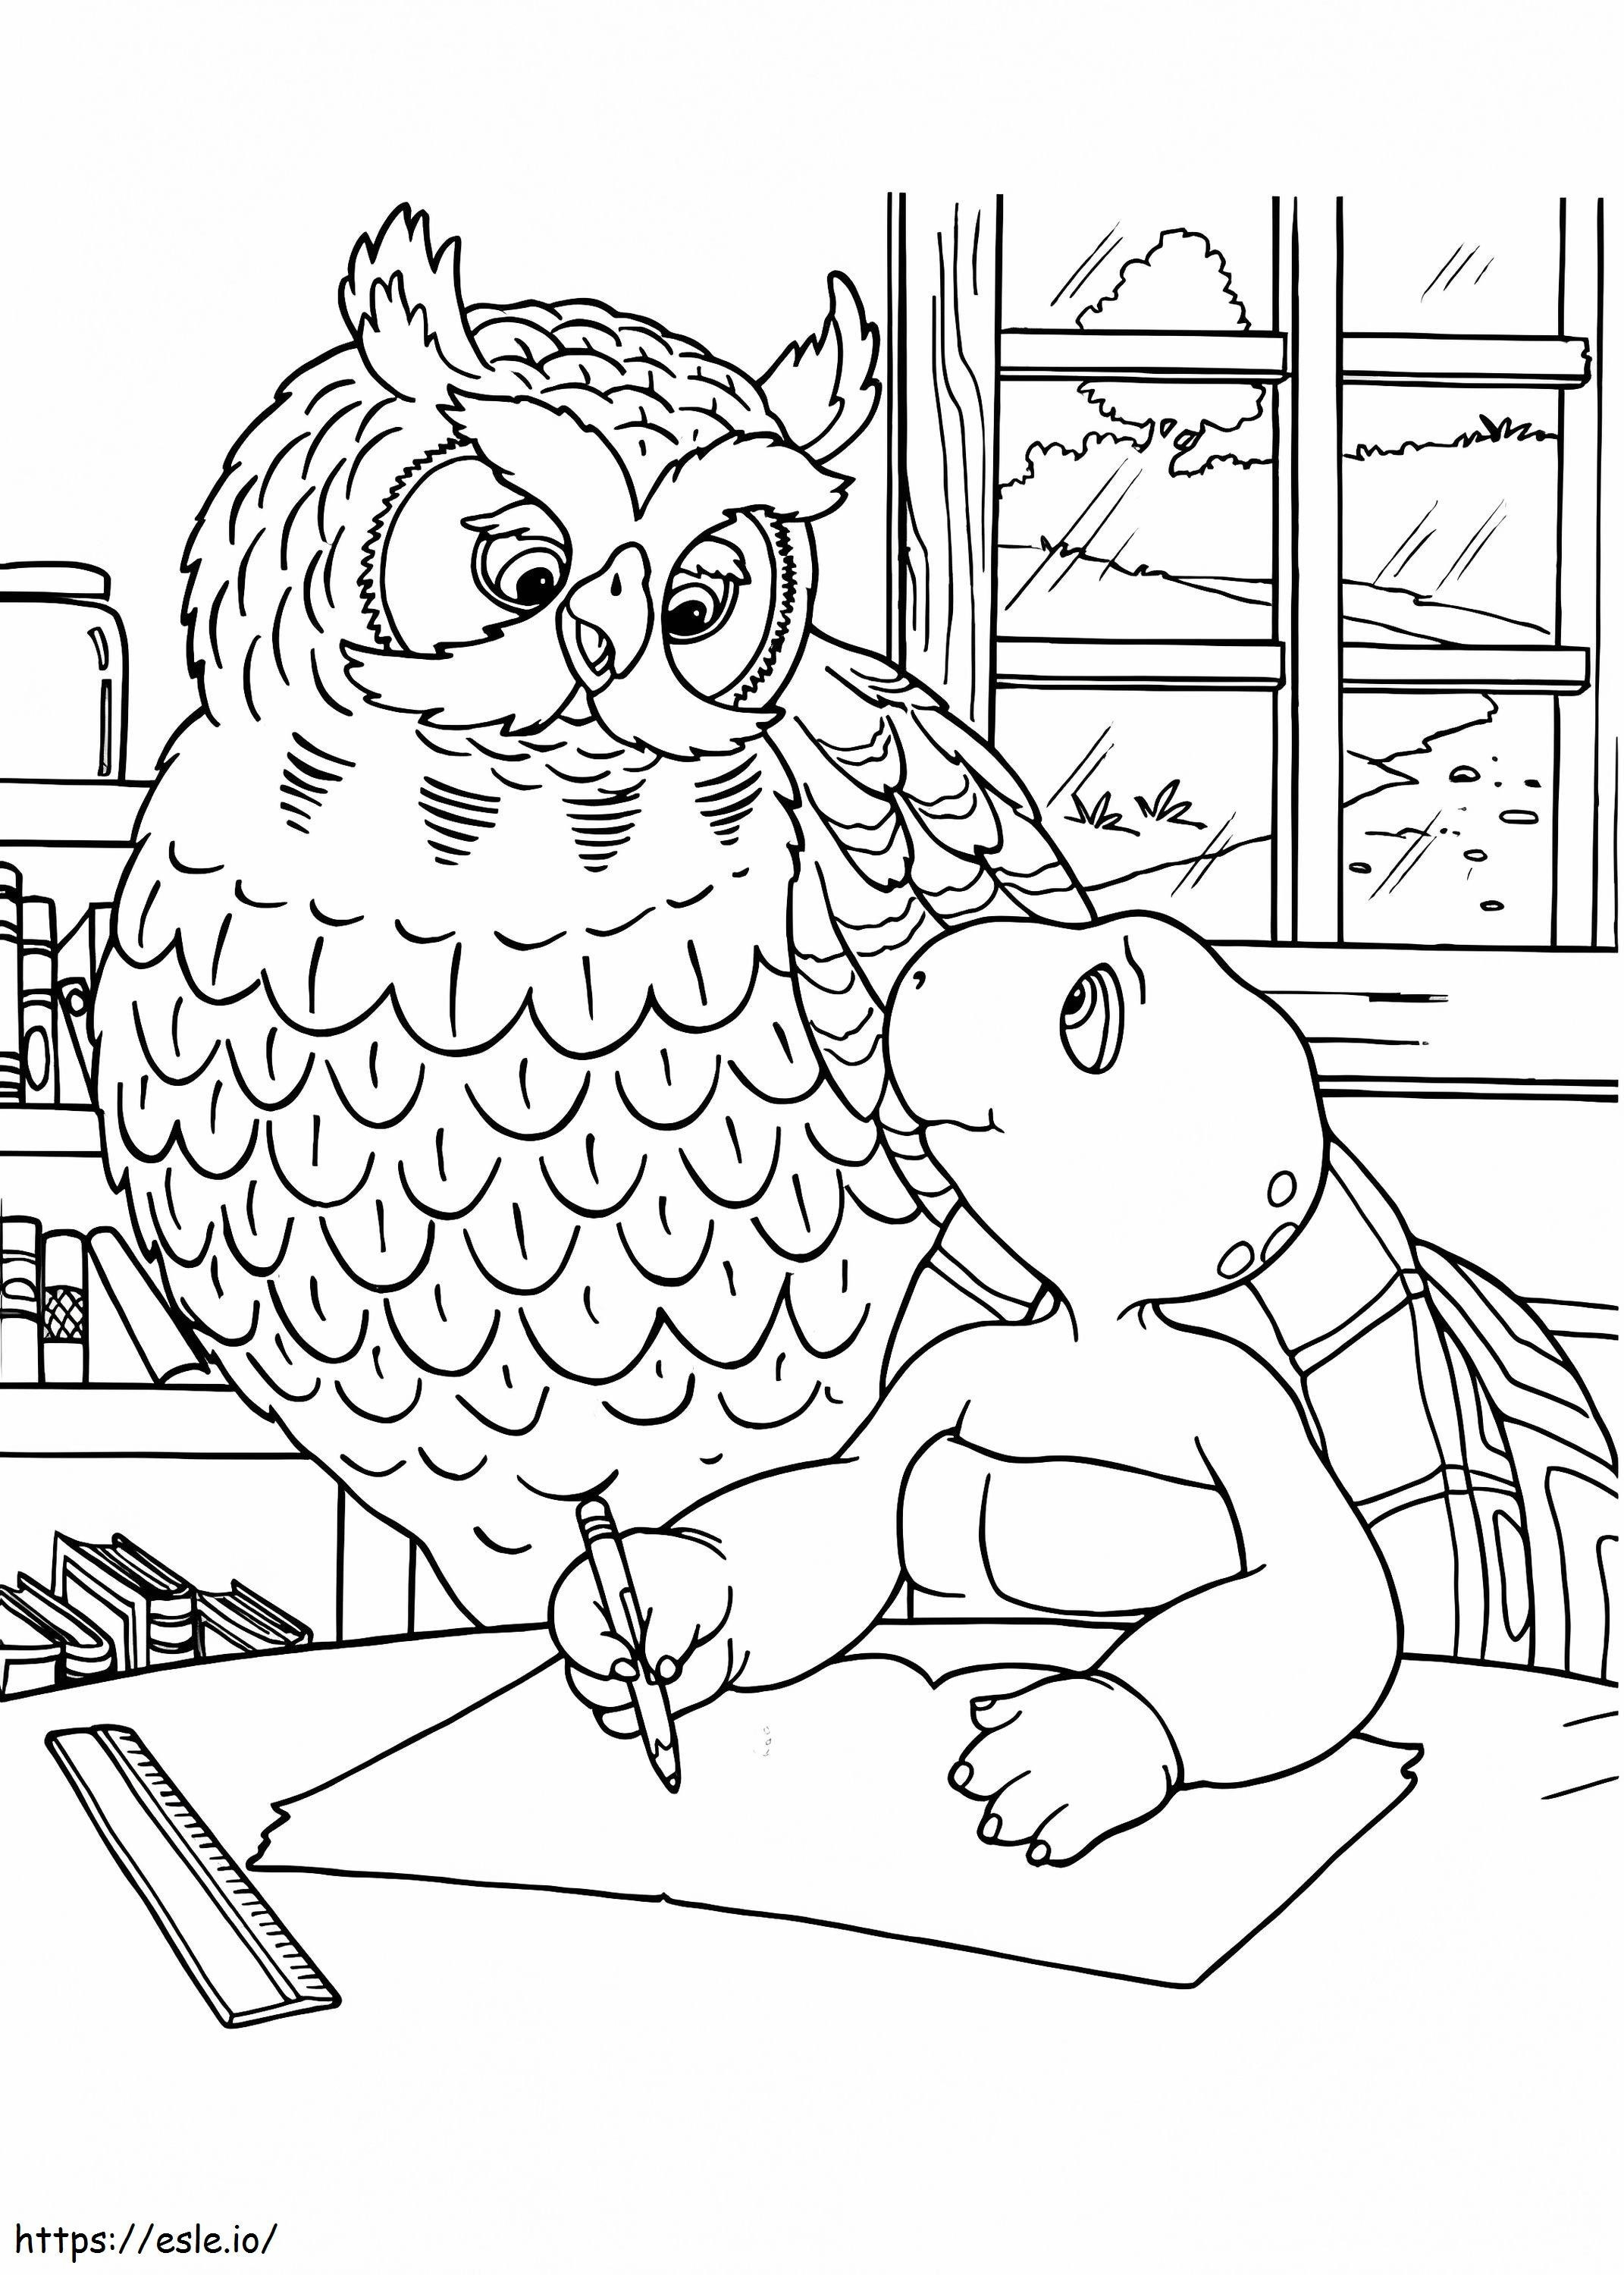 1535359761 Mr Owl And Franklin A4 coloring page